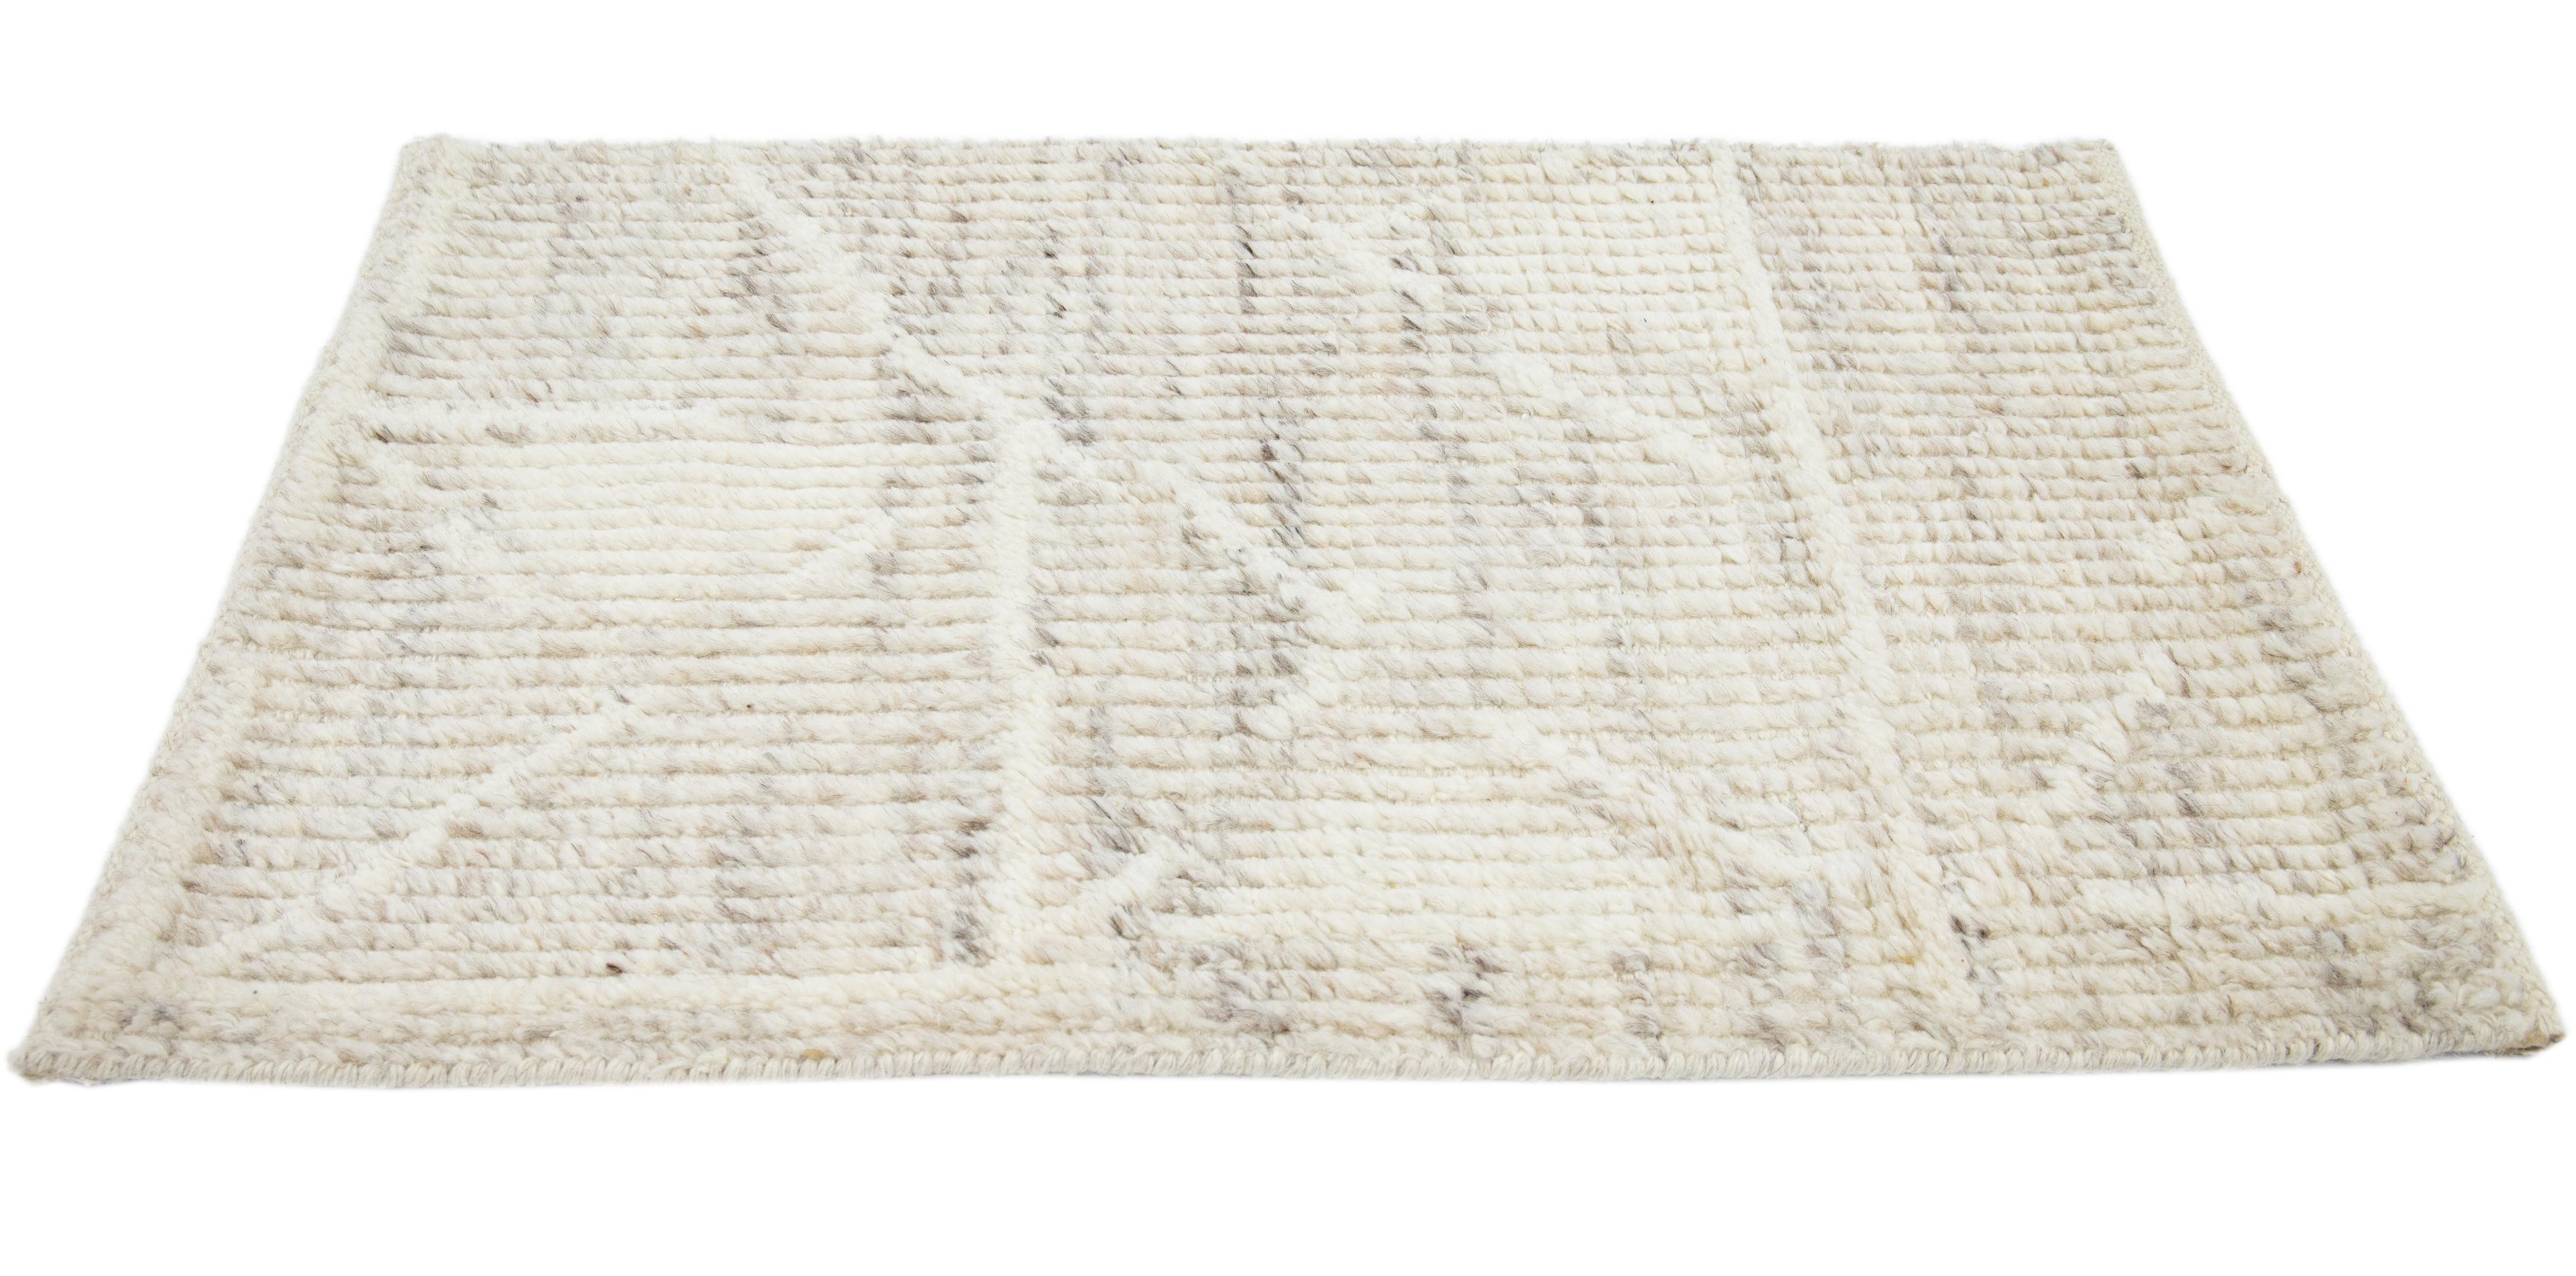 Apadana's Modern Moroccan style custom wool rug. Custom sizes and colors made-to-order. 

Material: Wool 
Techniques: Hand-Woven
Style: Moroccan 
Lead time: Approx. 15-16 wks available 
Colors: As shown, other custom colors are available.